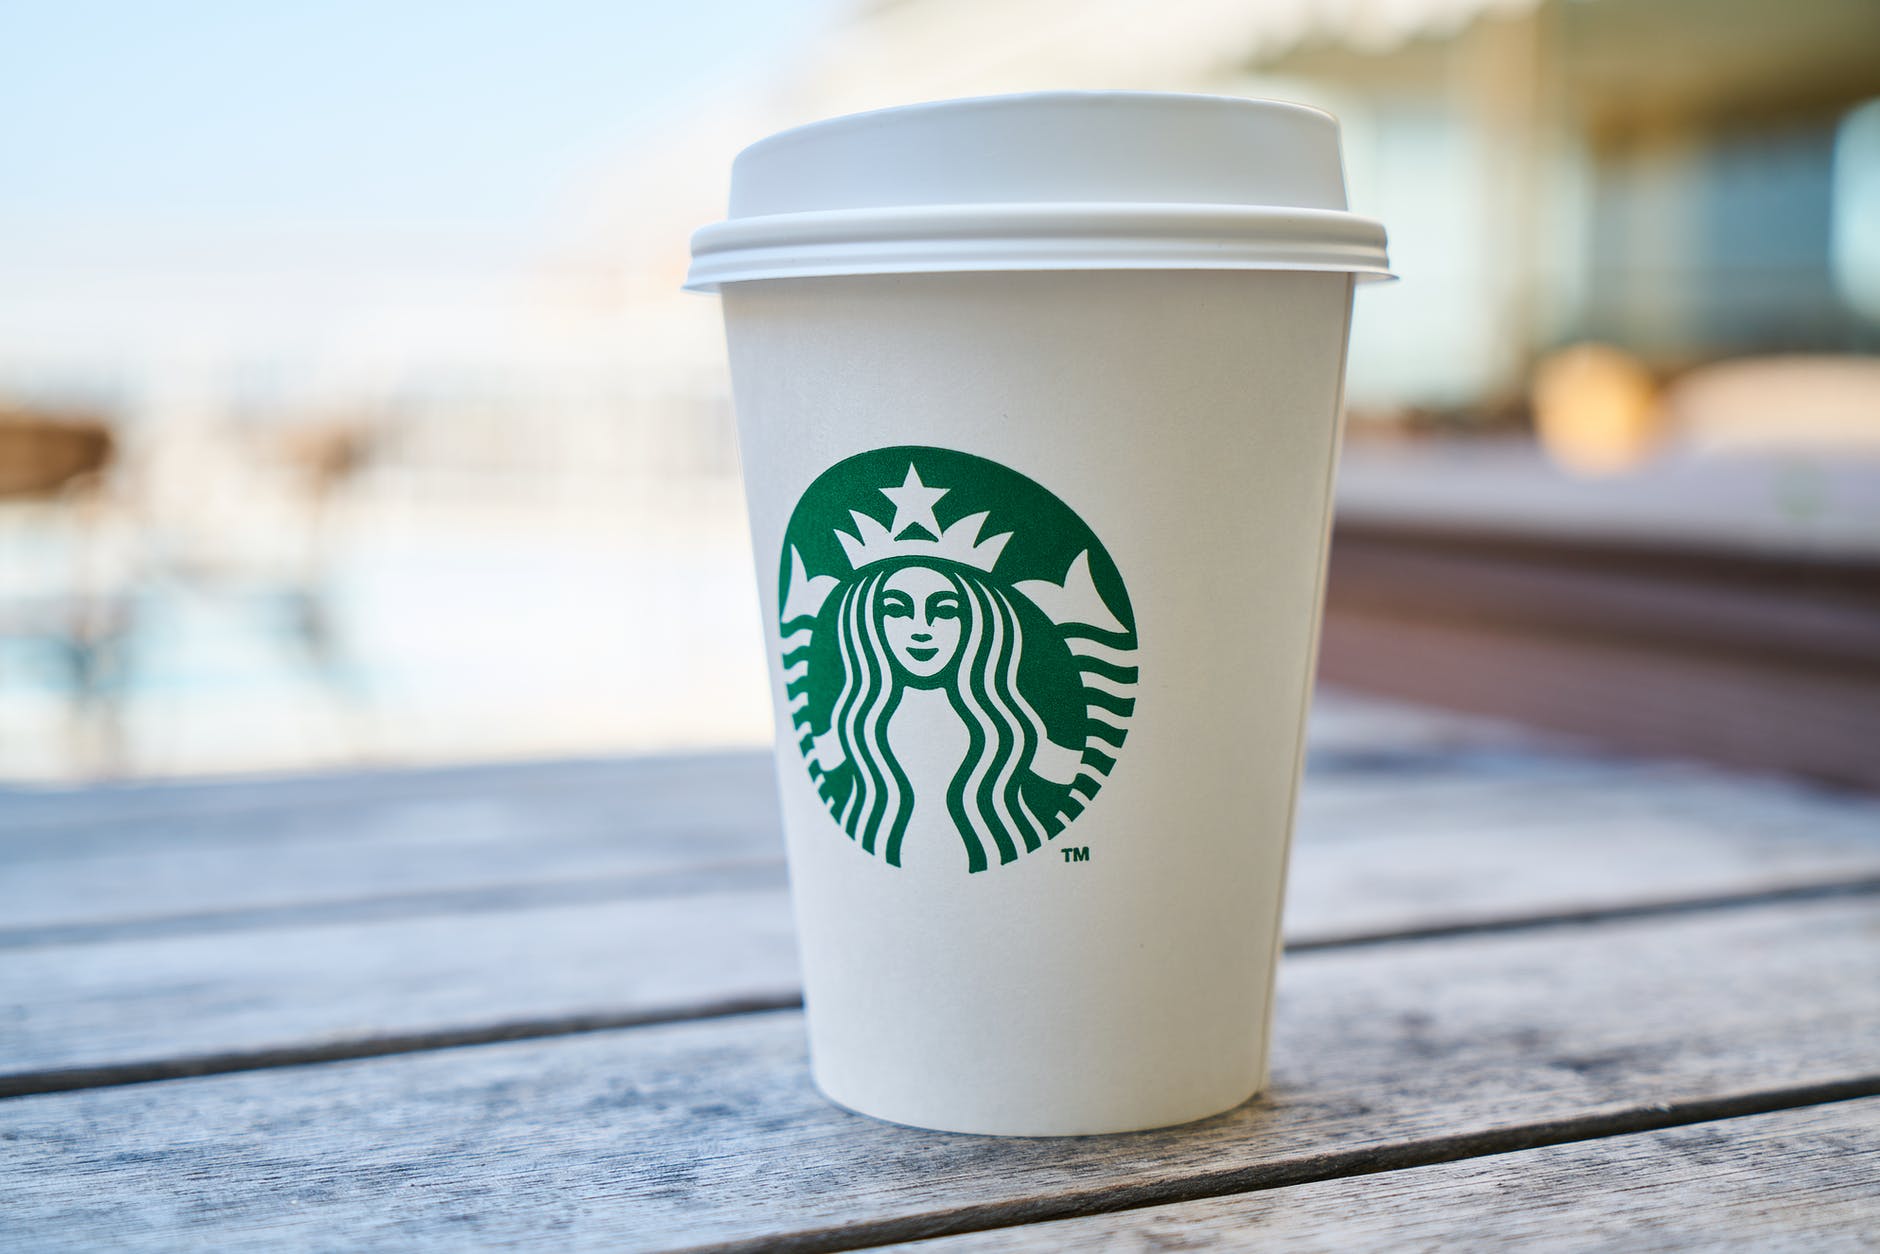 Low-Calorie Alternatives to Your Favorite Starbucks Drinks